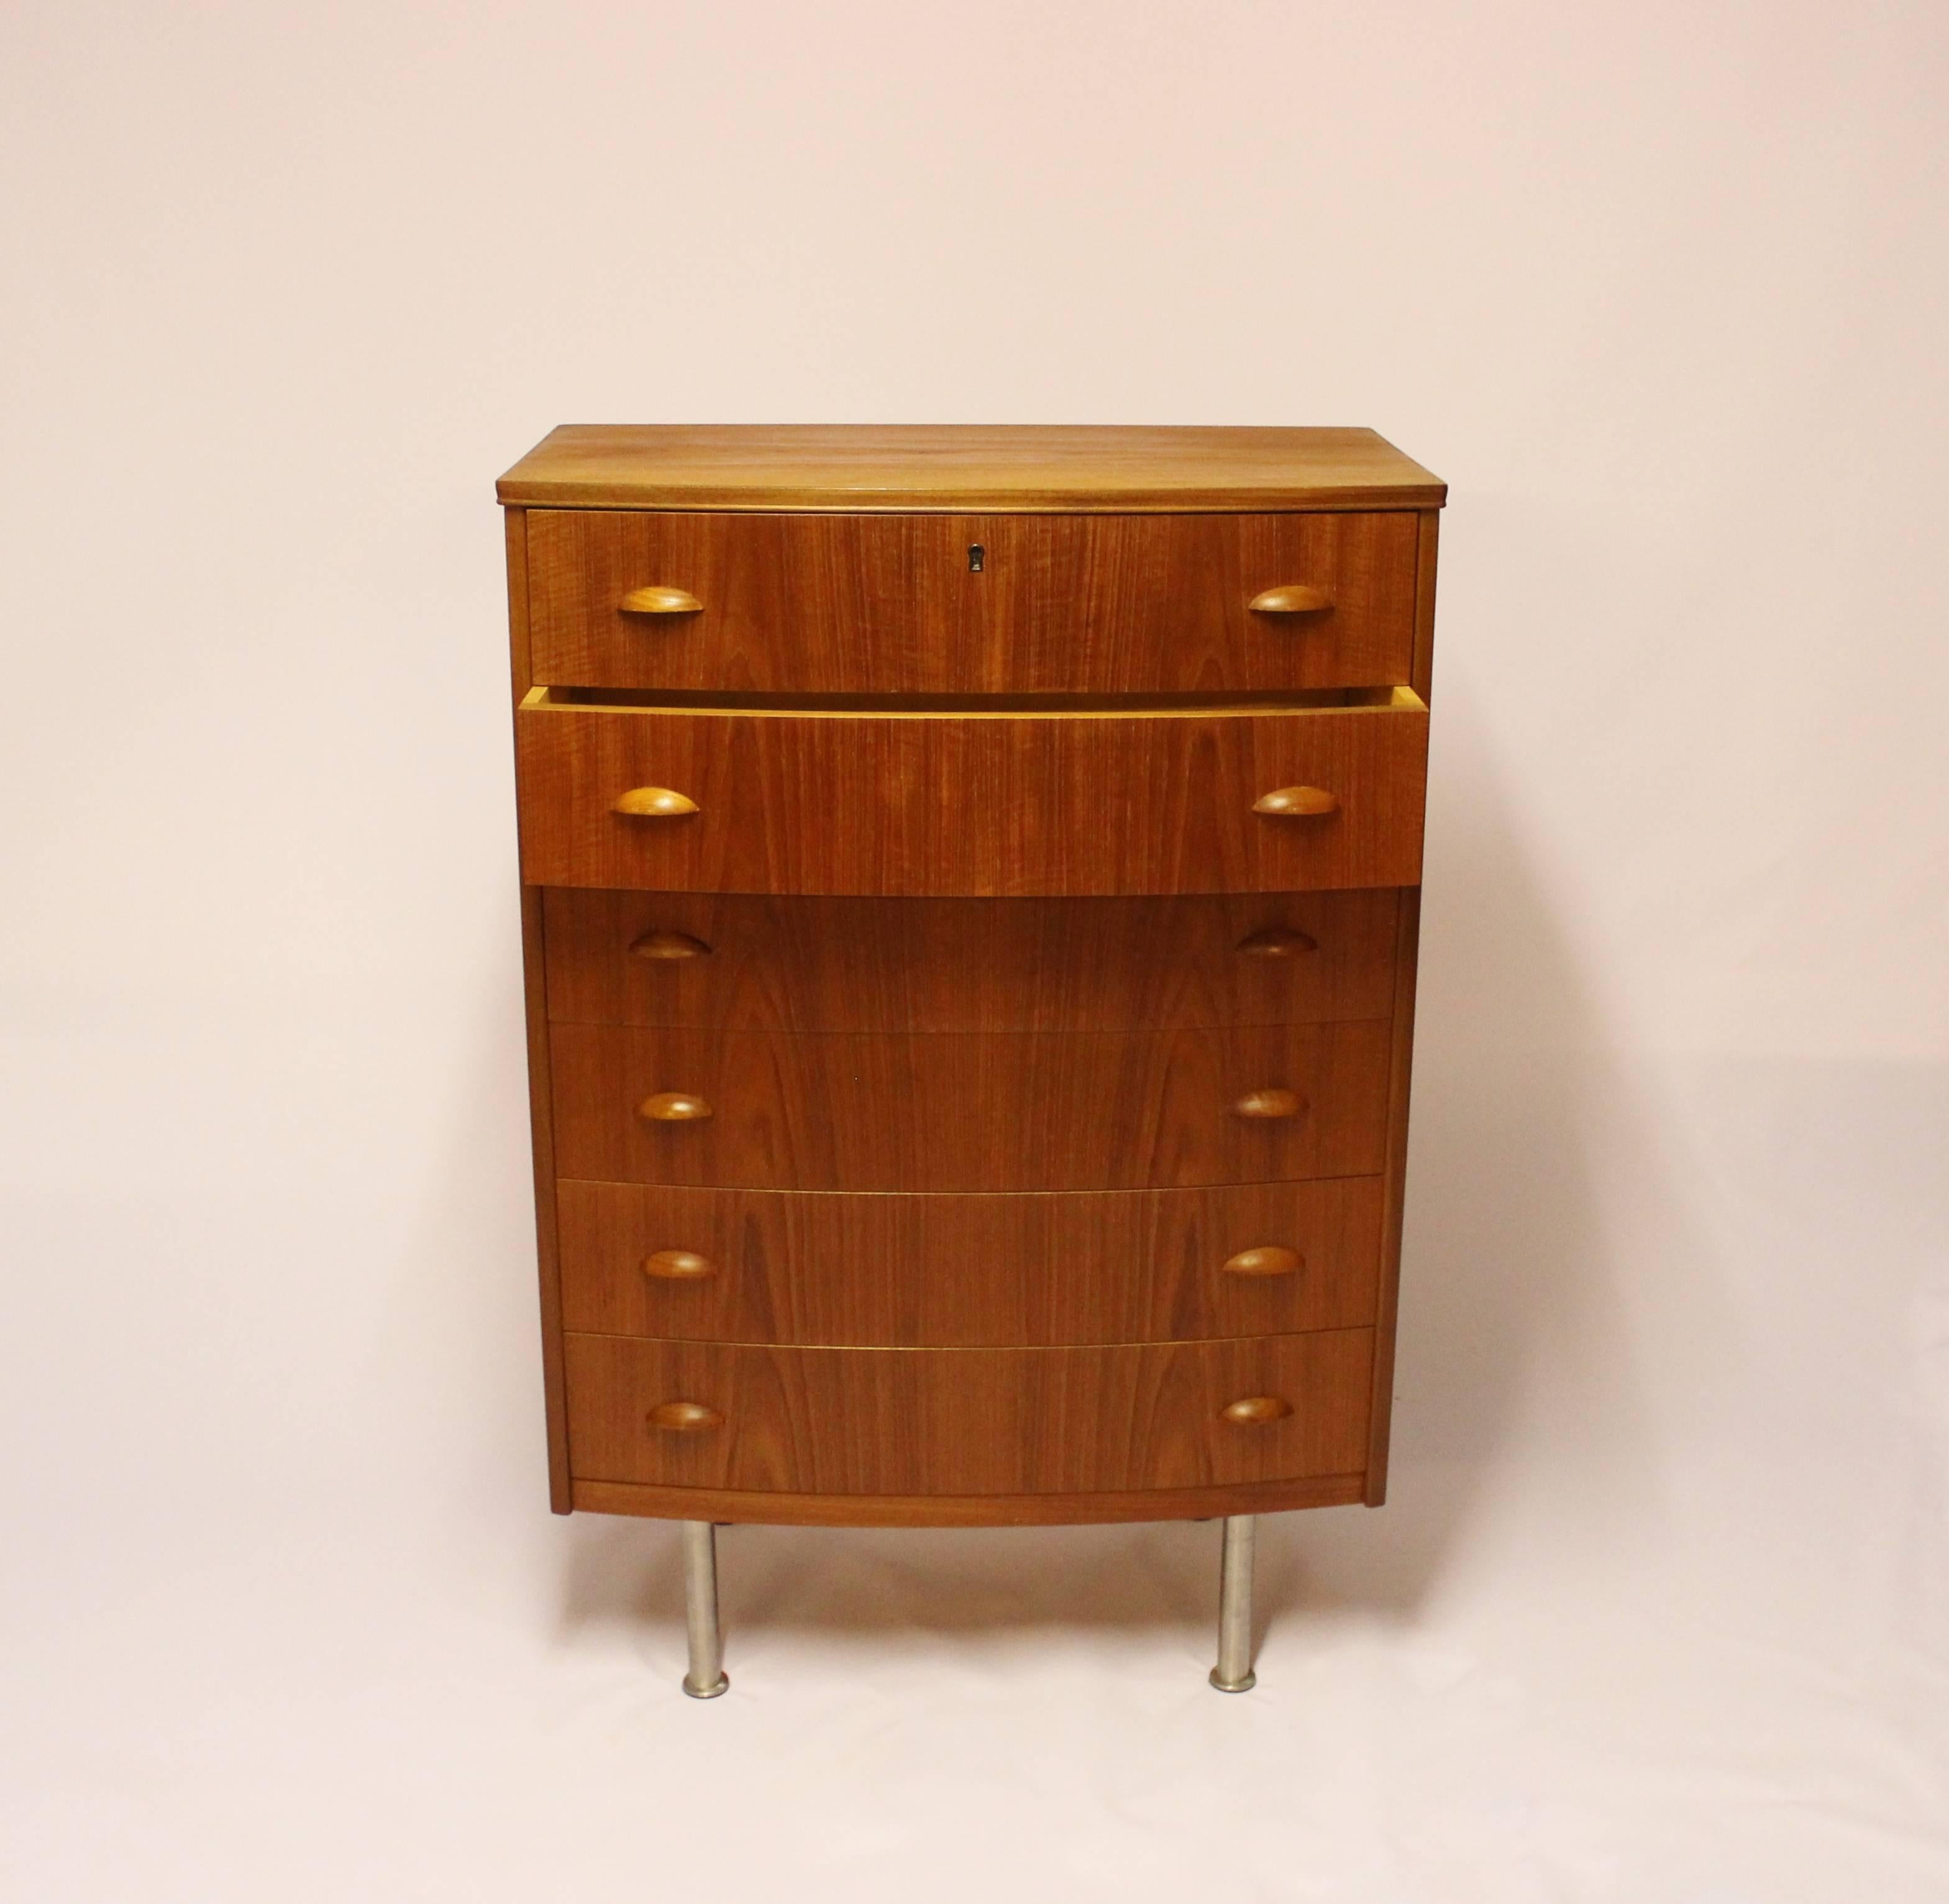 Scandinavian Modern Chest with Six Drawers in Teak and Oak Designed by Kai Kristiansen, 1960s